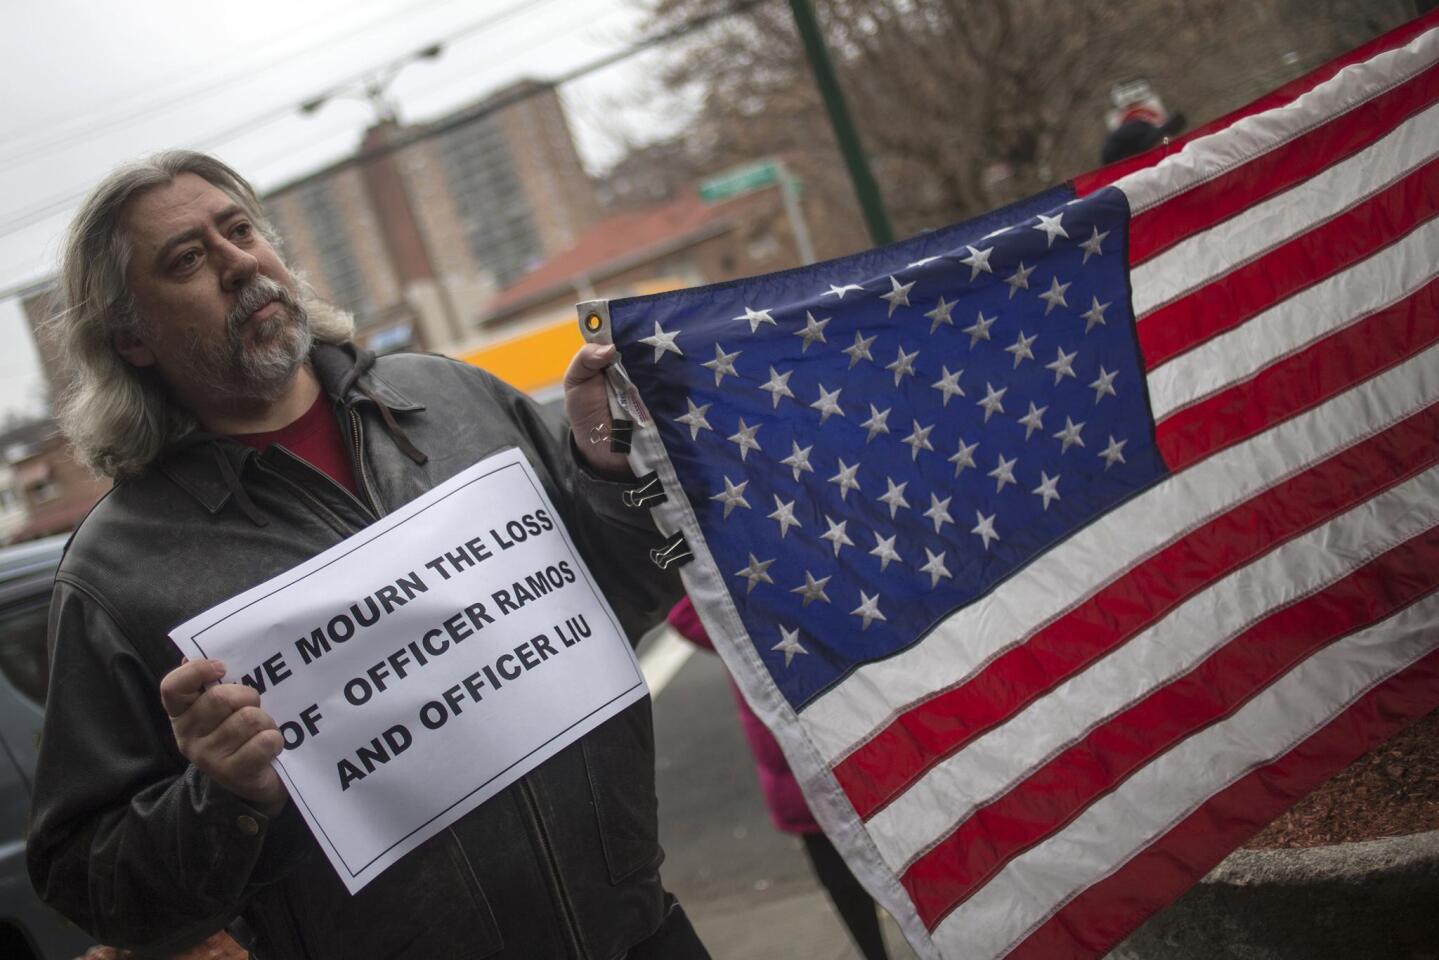 A man holds a sign and the American flag as he gathers with dozens to show support for policemen in New York